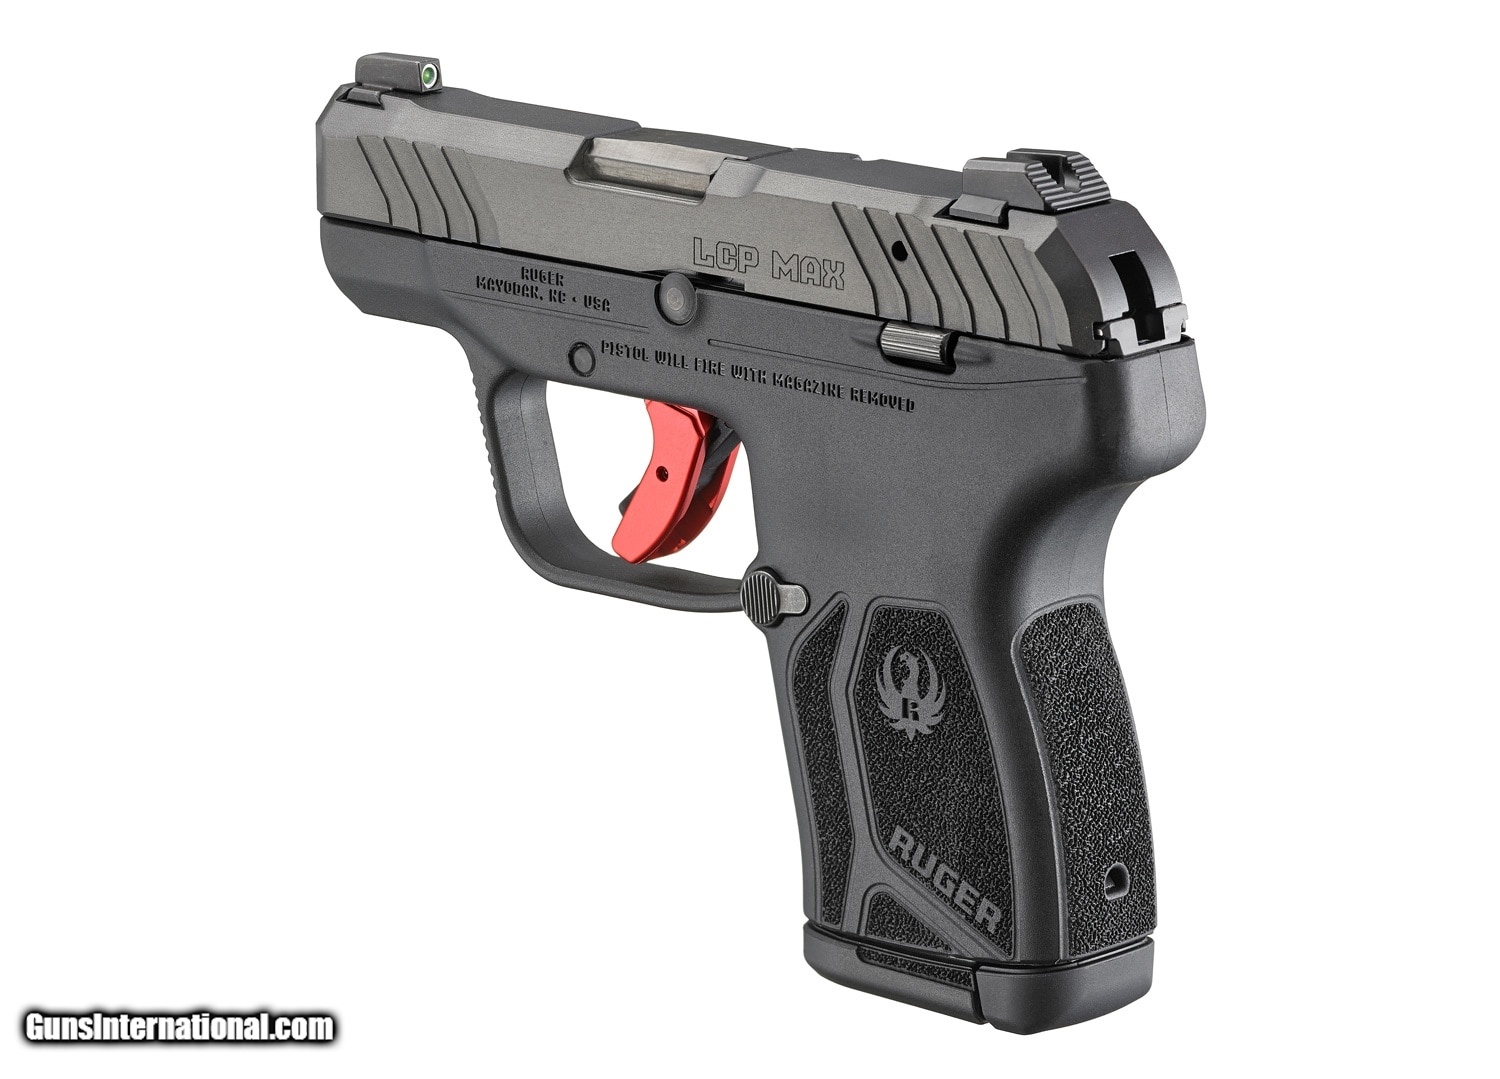 Ruger Lcp Max Elite 380 Acp 2067